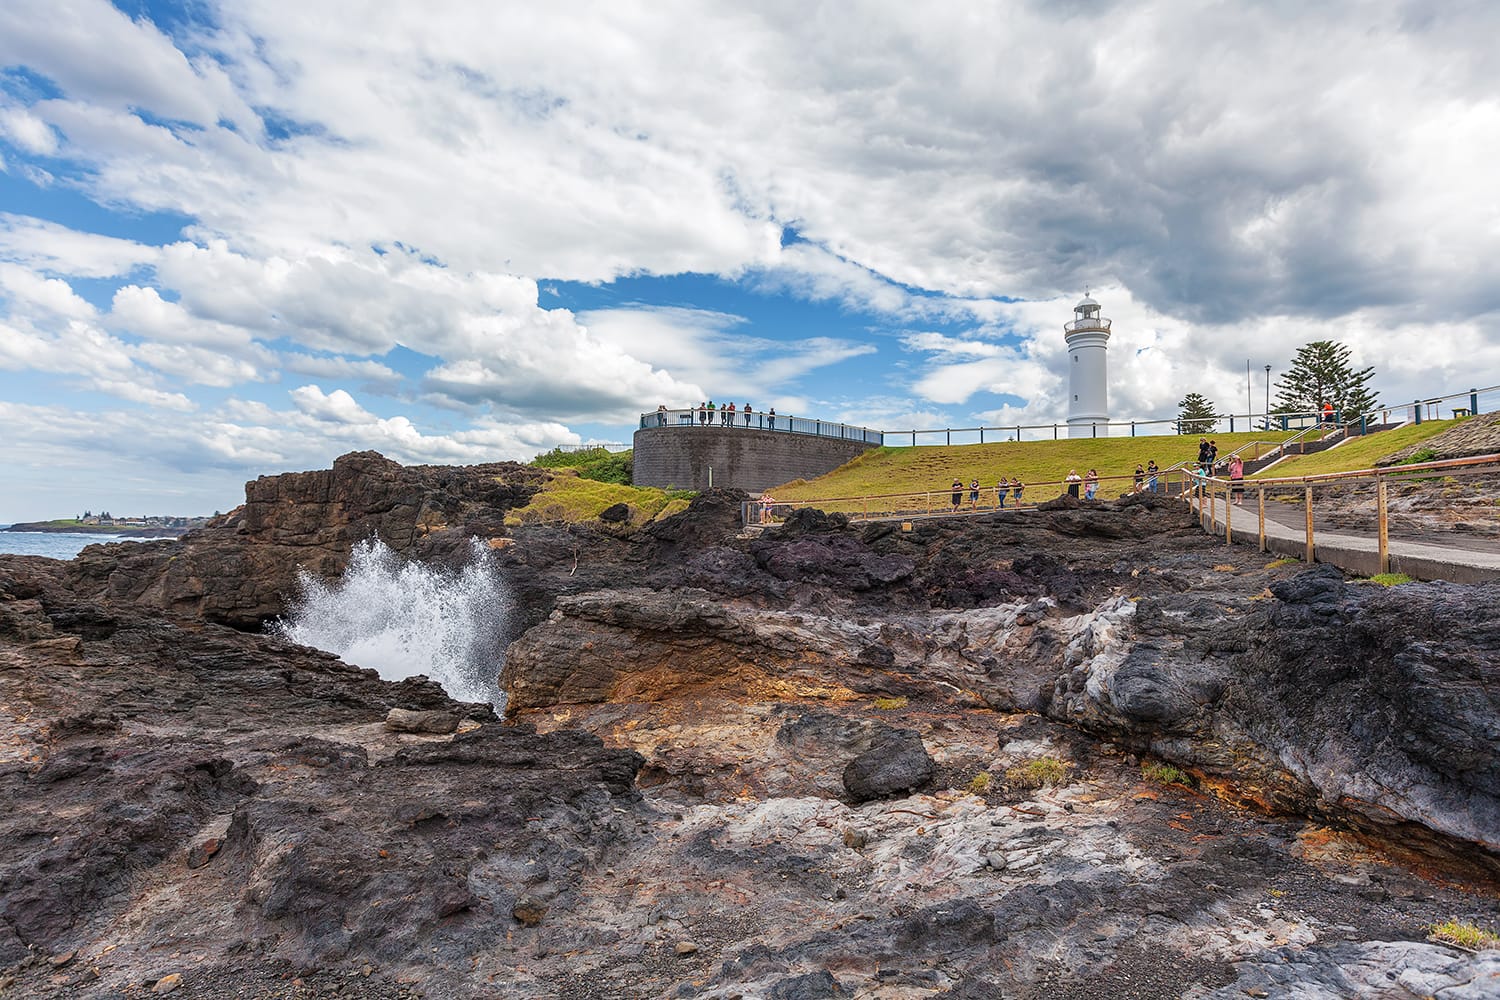 Kiama Lighthouse with water spraying out of the blowhole, Sydney, NSW, Australia